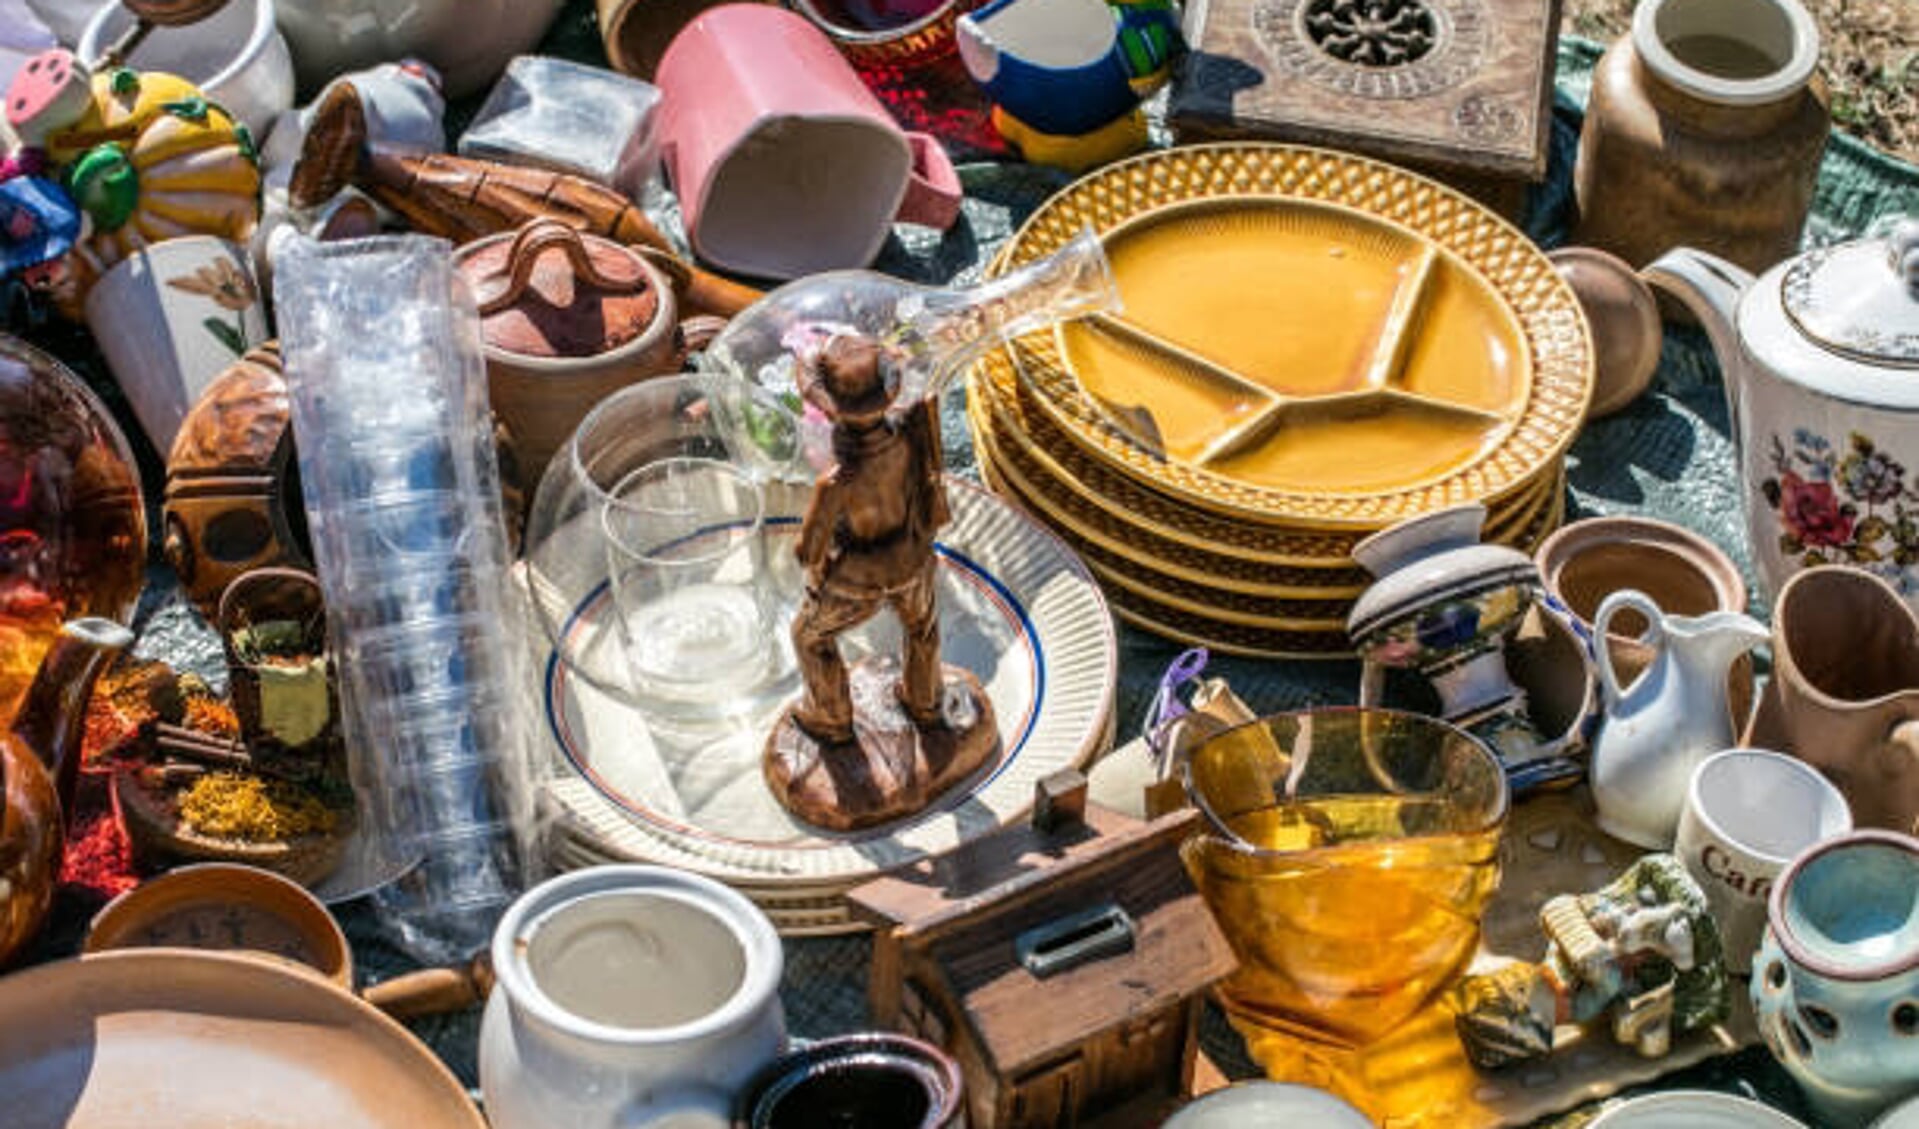 pile of household things, various dishes and decorative objects at boot sale for second hand, recycling or over-consumption society at outdoor welfare